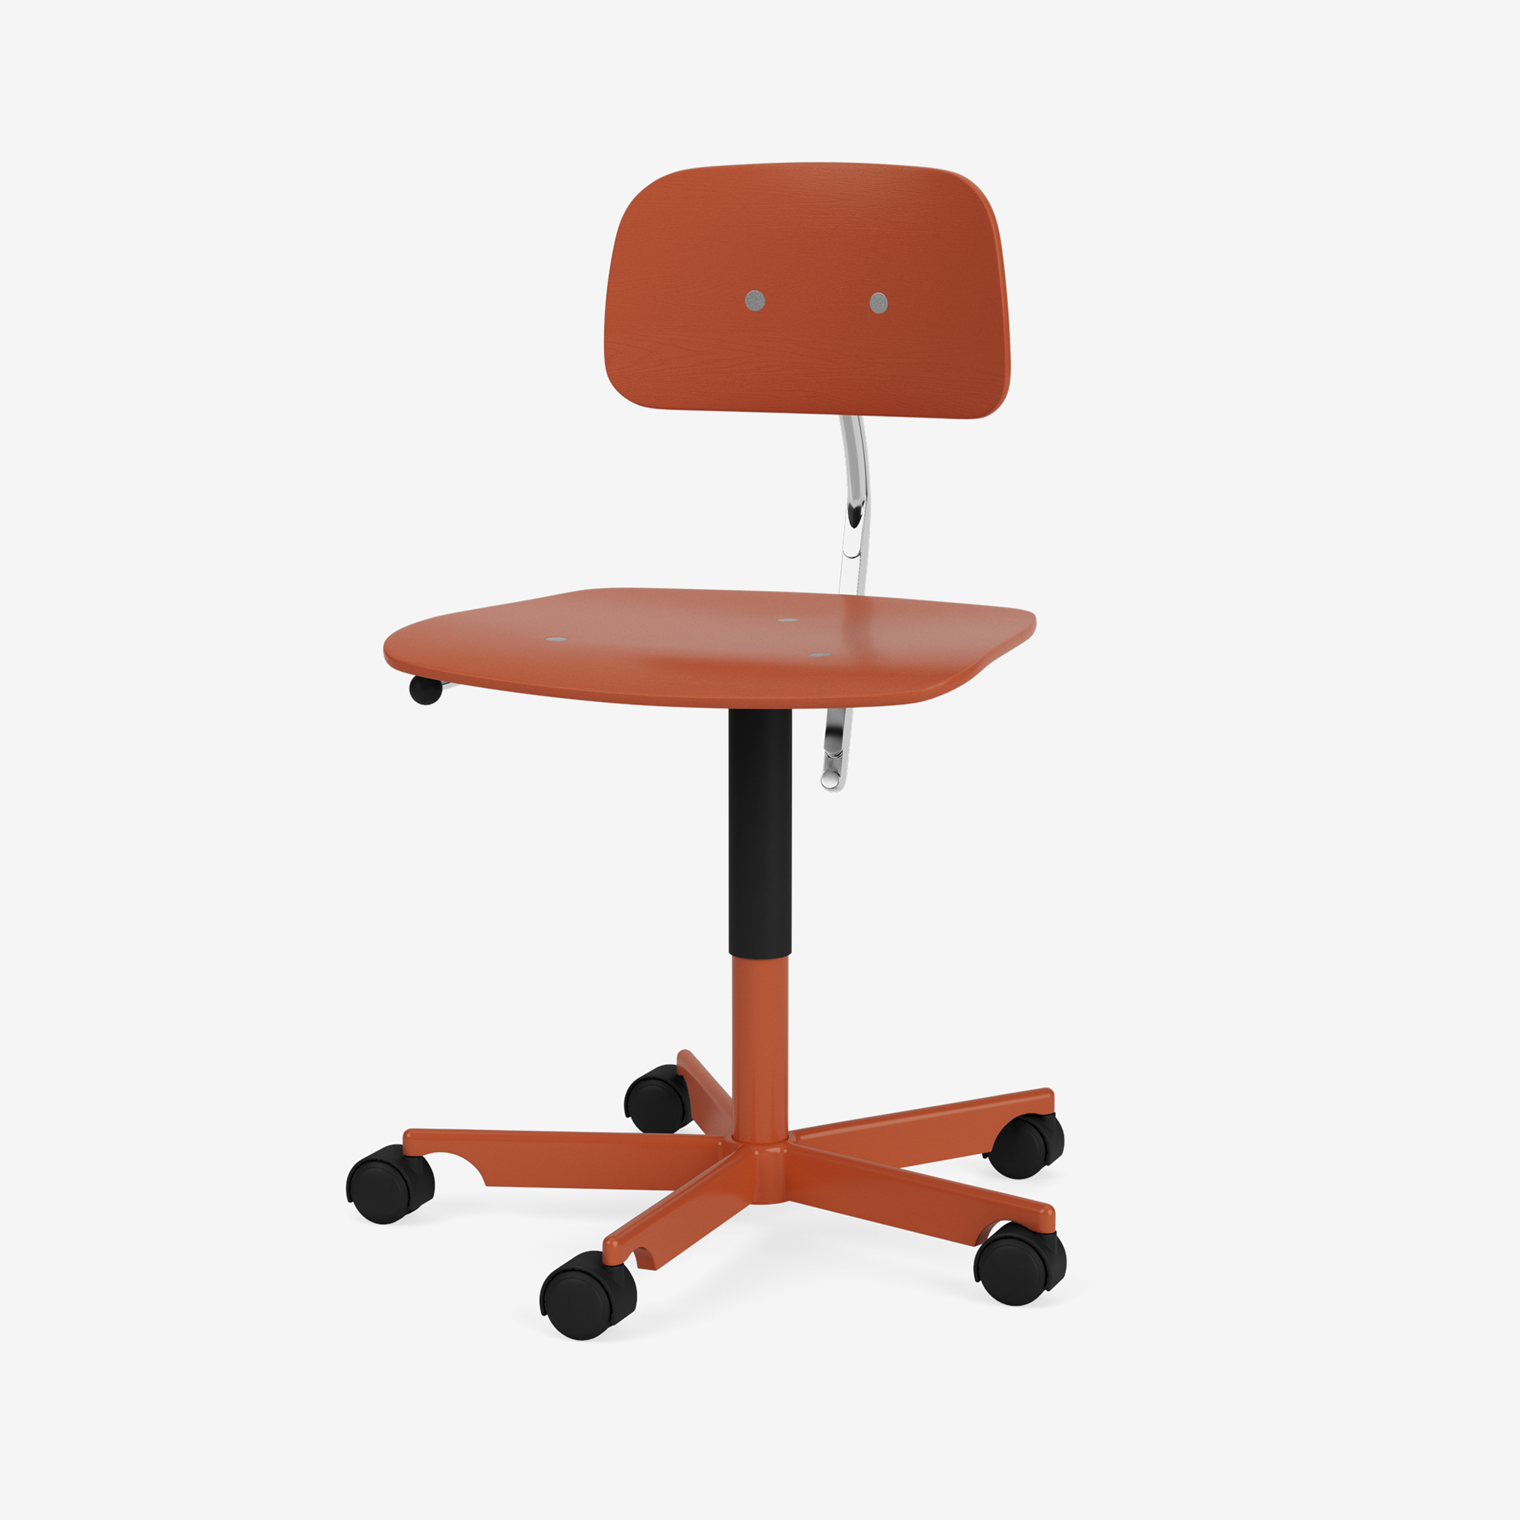 Kevi 2533 office chair